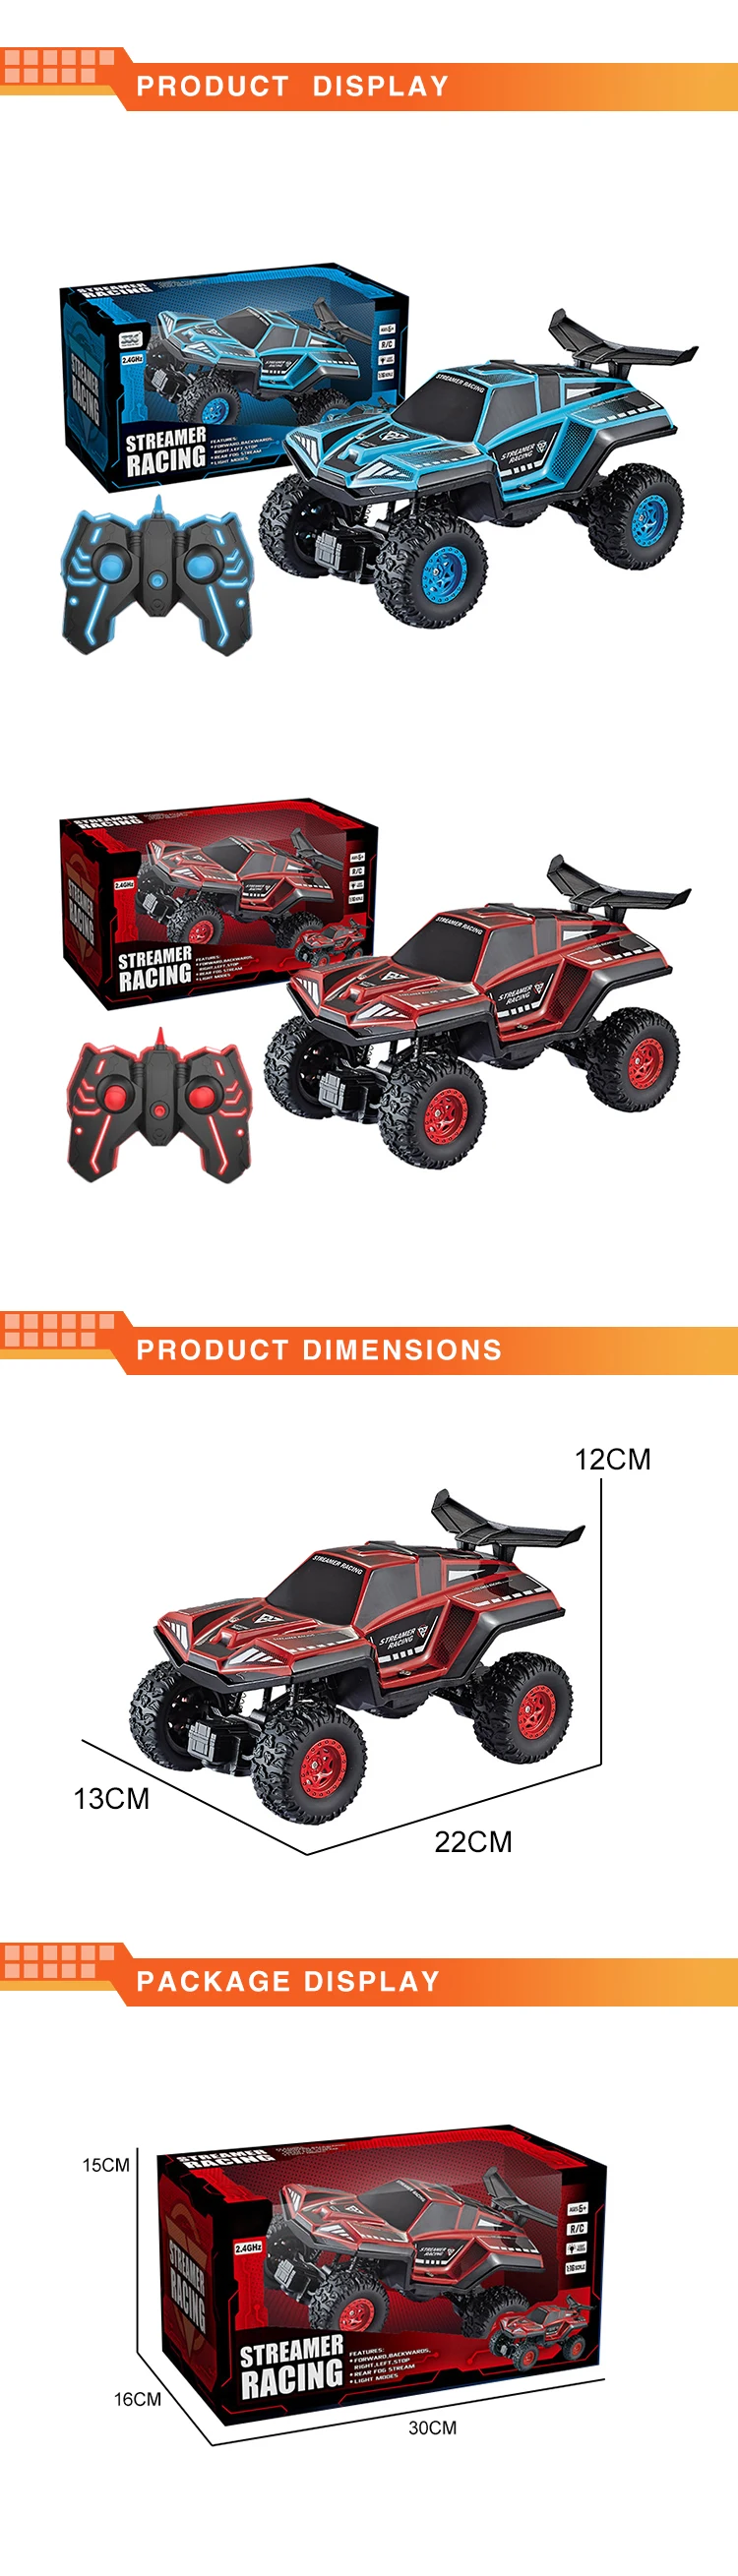 2020 New arrival 4WD 1:16 streamer racing remote car with light